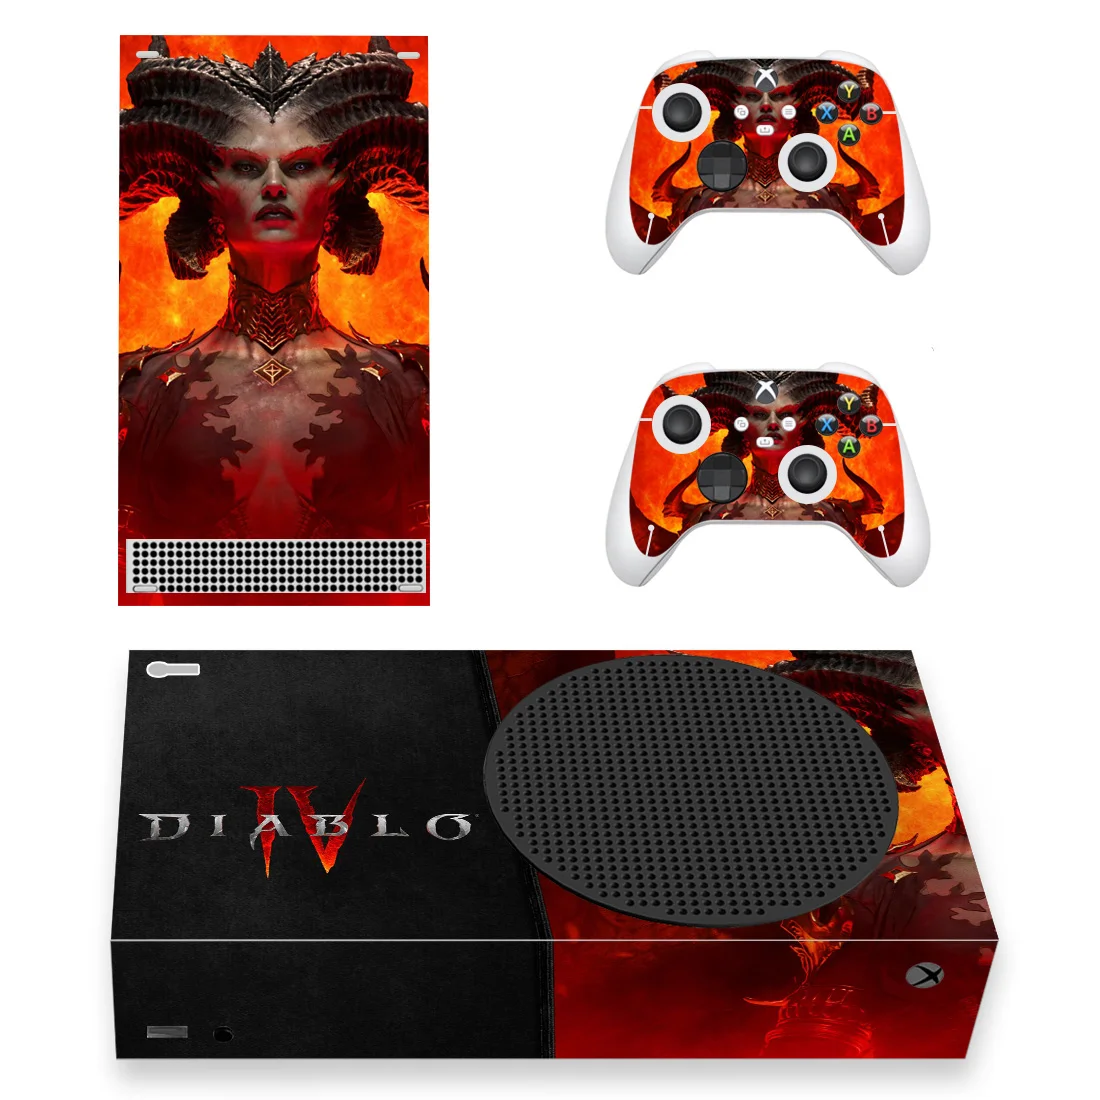 

Diablo IV 4 Skin Sticker Decal Cover for Xbox Series S Console and 2 Controllers Xbox Series Slim Skin Sticker Vinyl